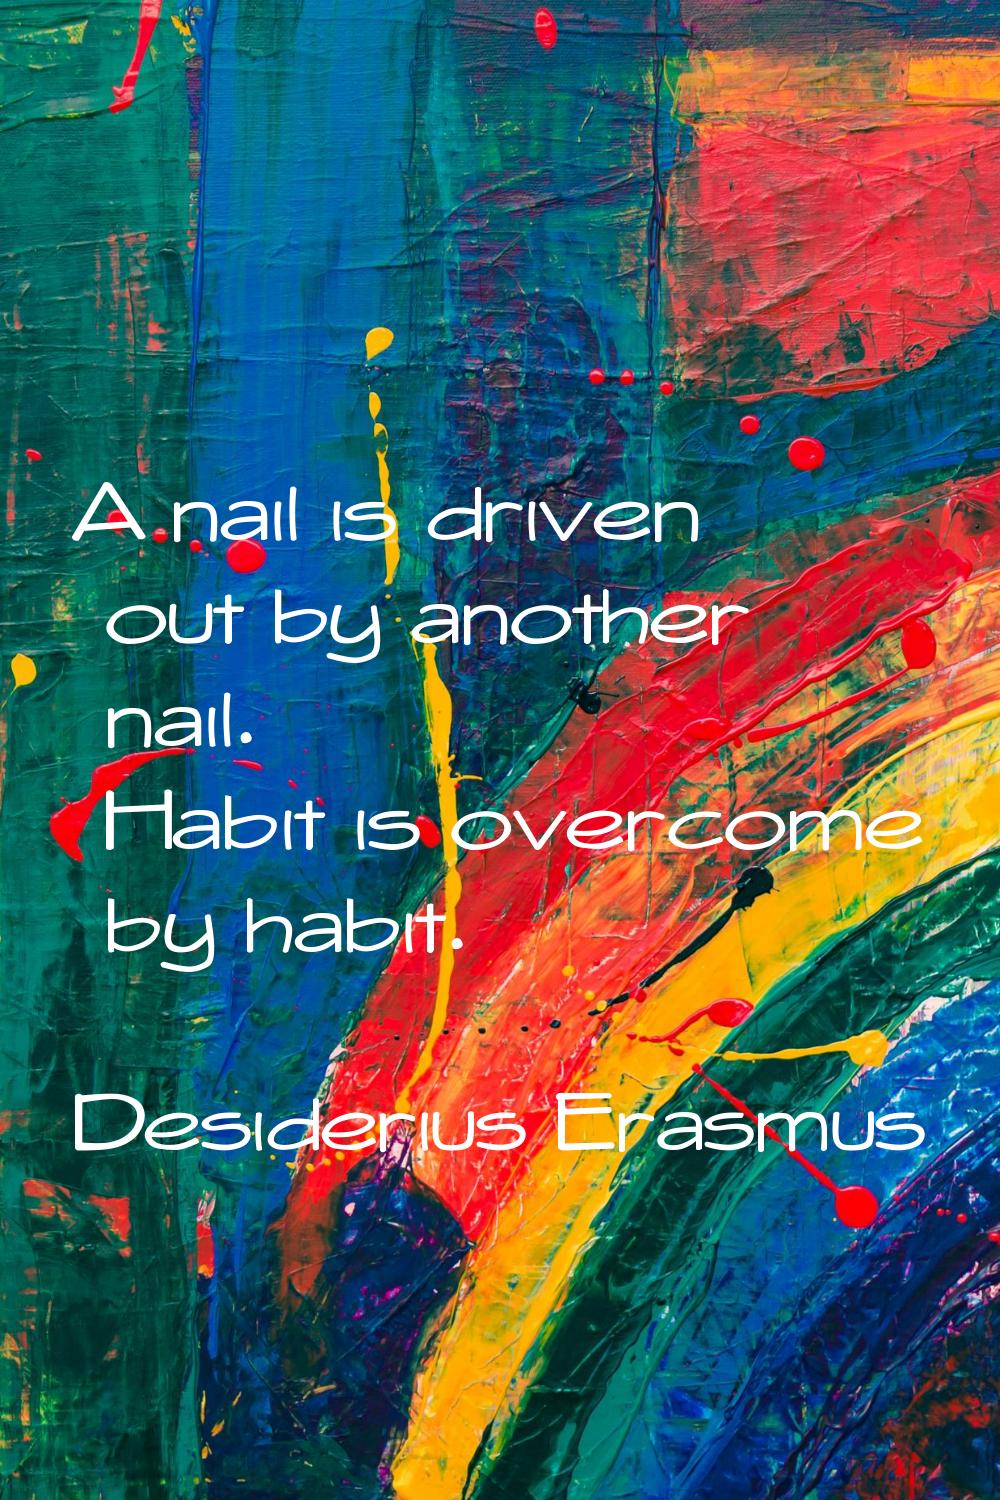 A nail is driven out by another nail. Habit is overcome by habit.